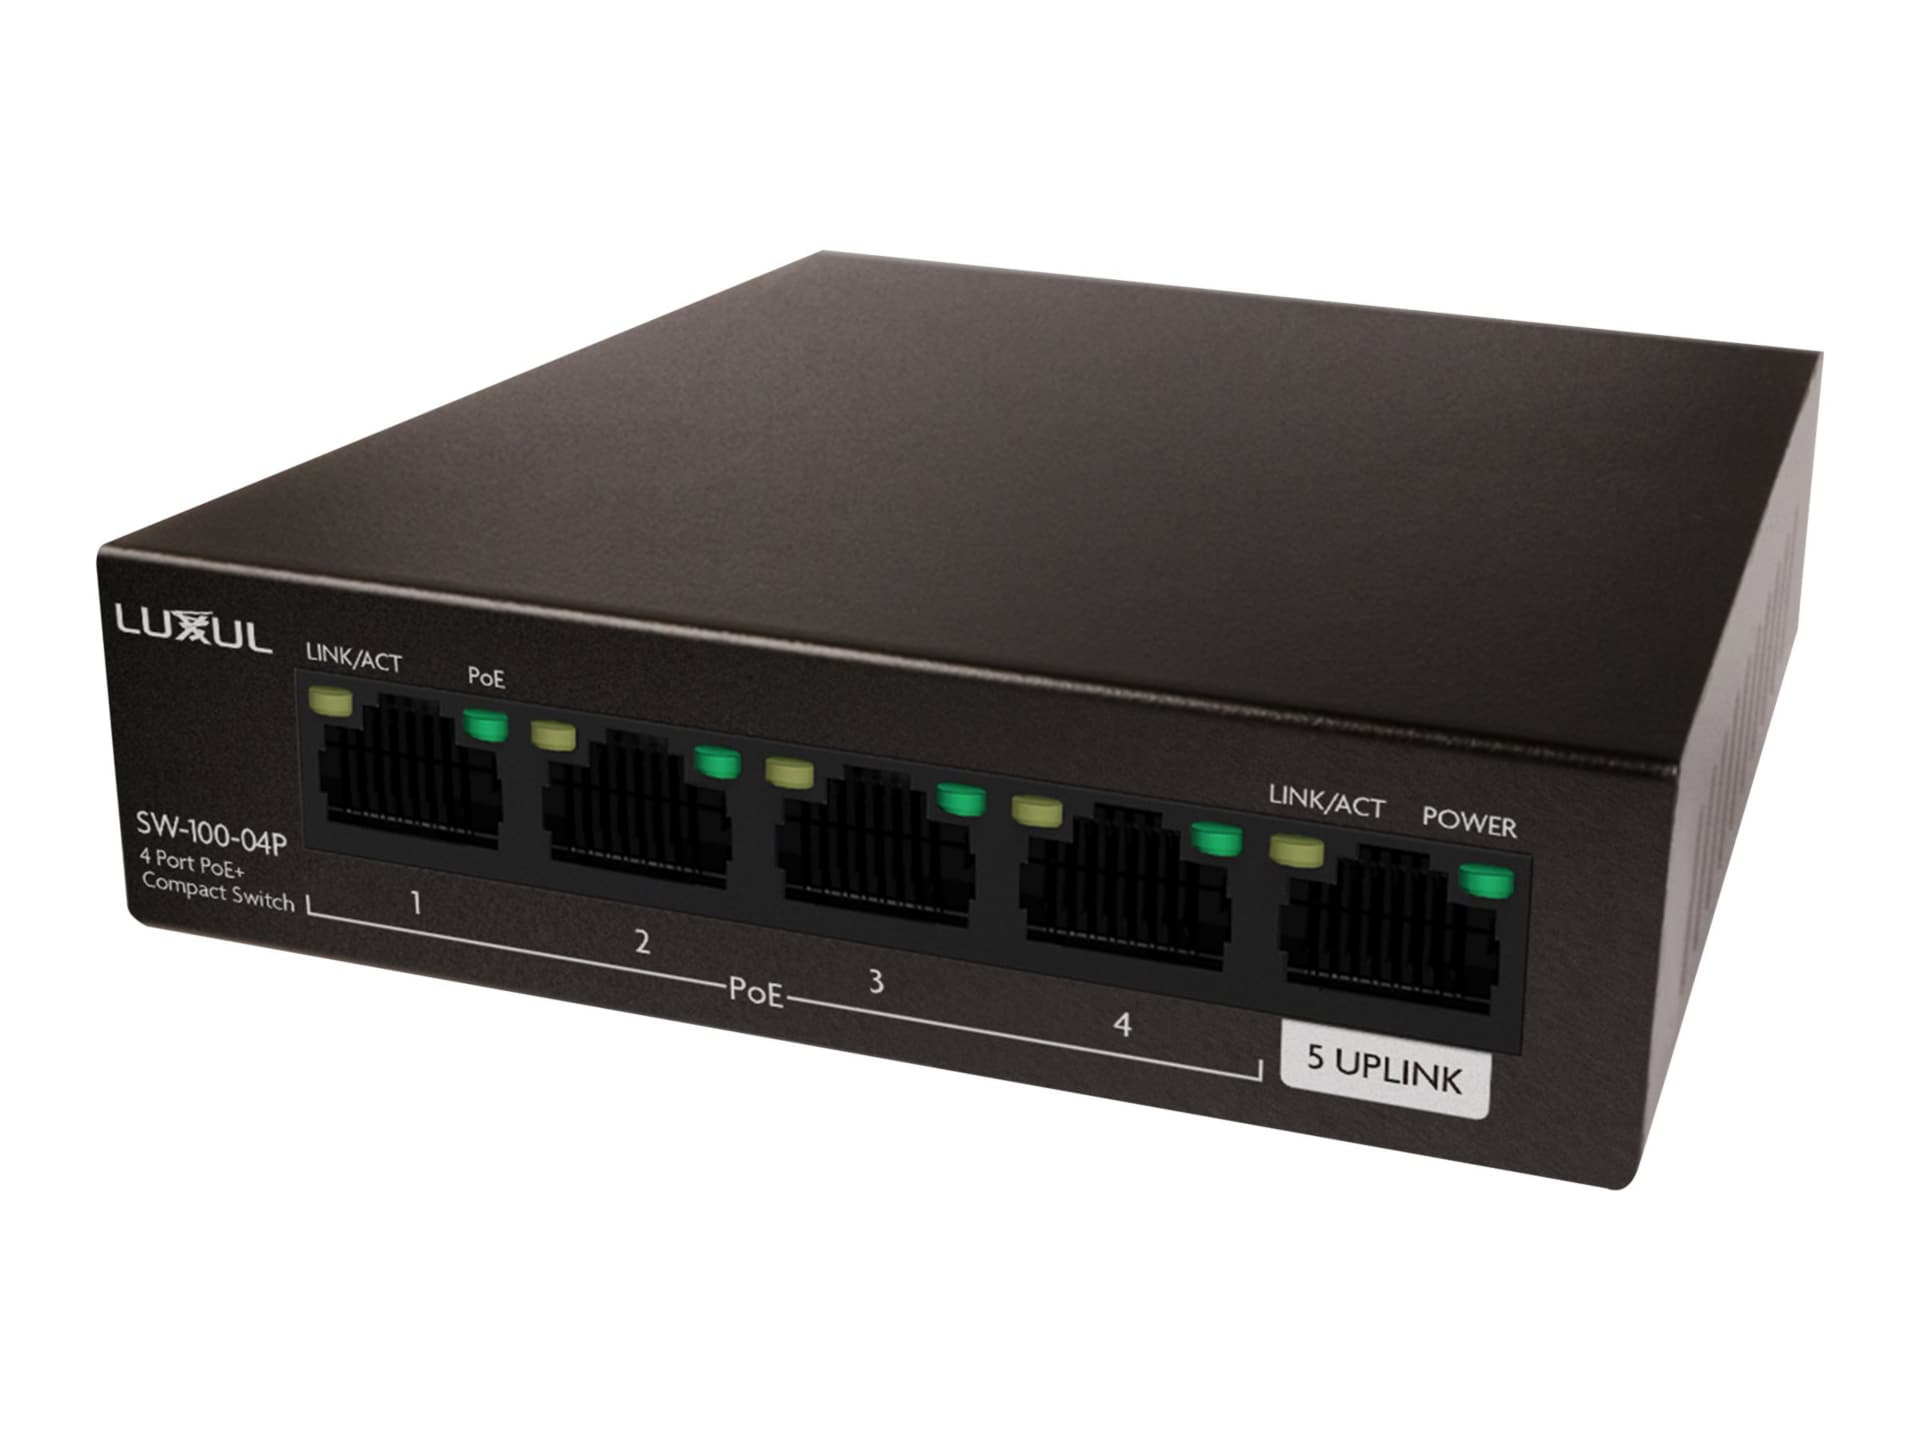 Luxul 4-Port Unmanaged PoE+ Switch - Wireless Access Point - SW-100-04P 290  - Ethernet Switches 